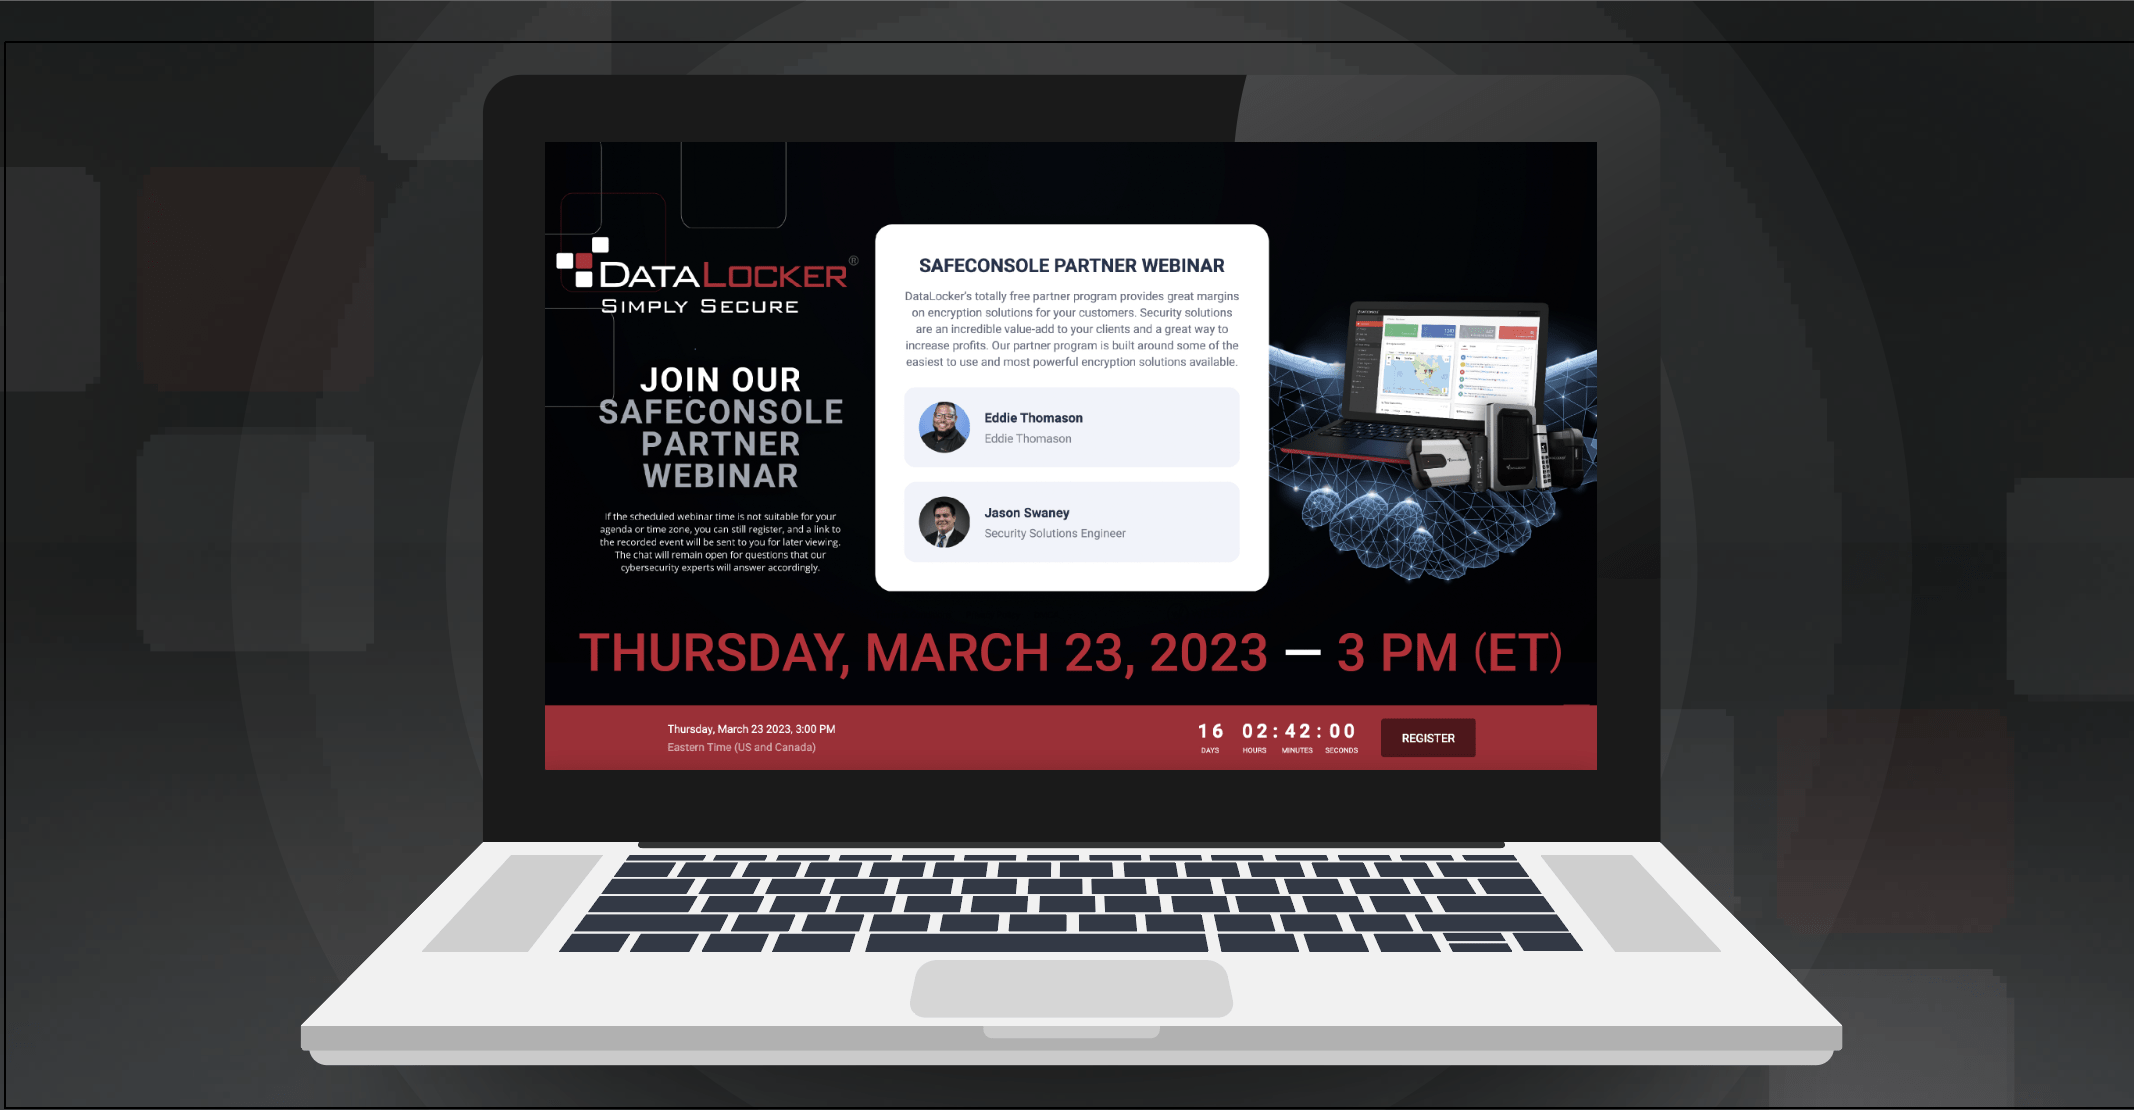 Join our upcoming SafeConsole Partner Webinar on Thursday, March 23, at 3 PM (ET)!